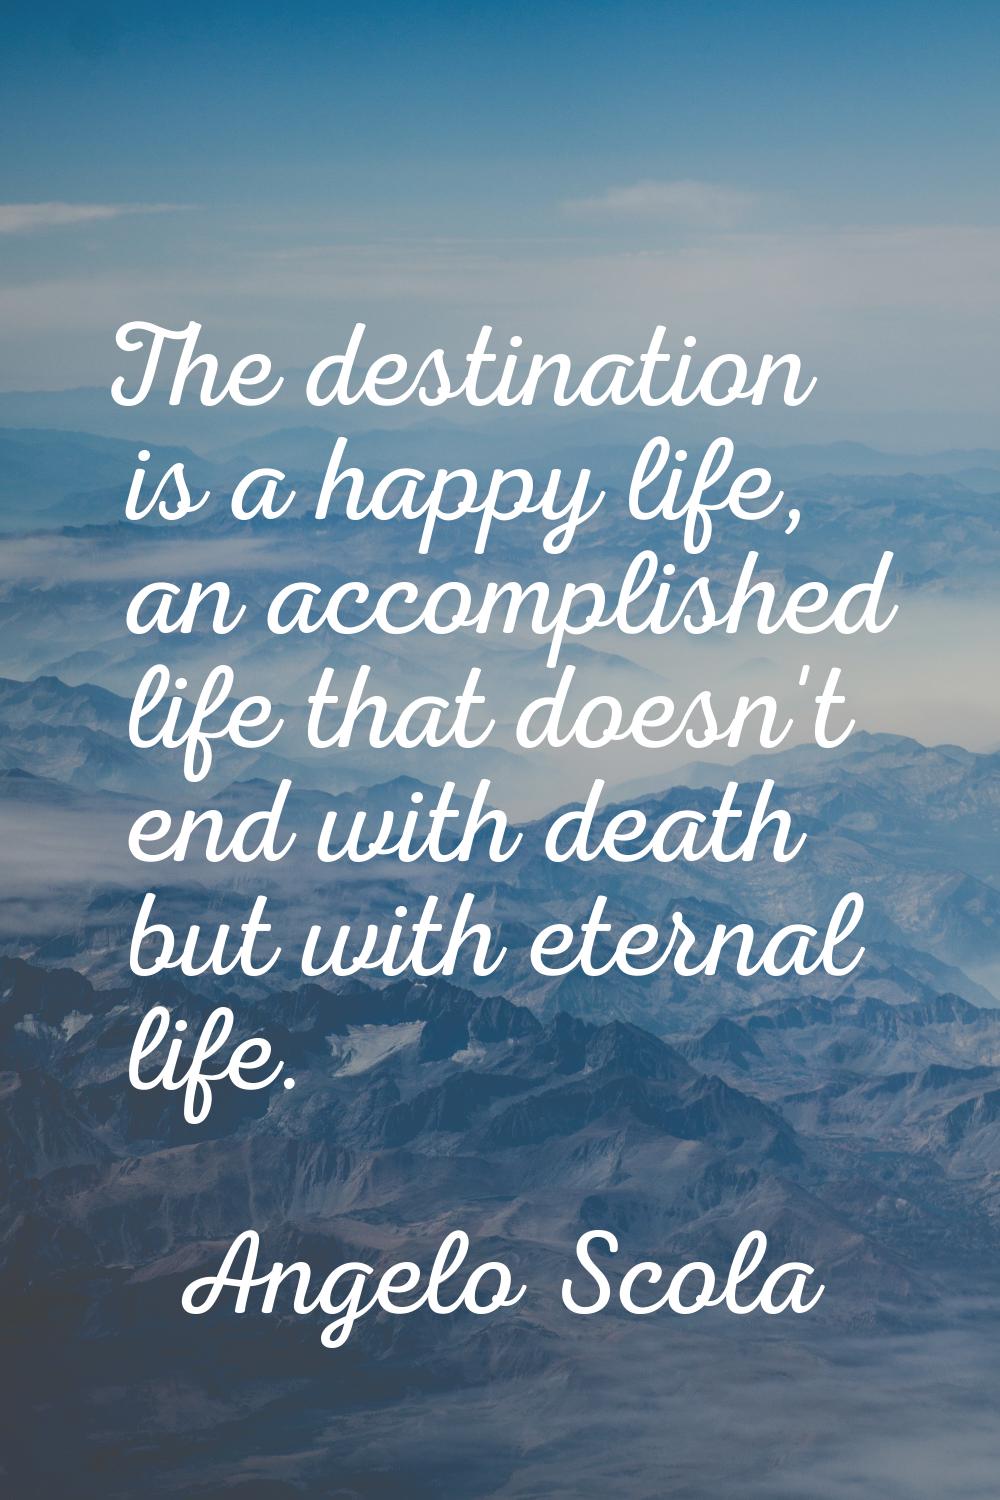 The destination is a happy life, an accomplished life that doesn't end with death but with eternal 